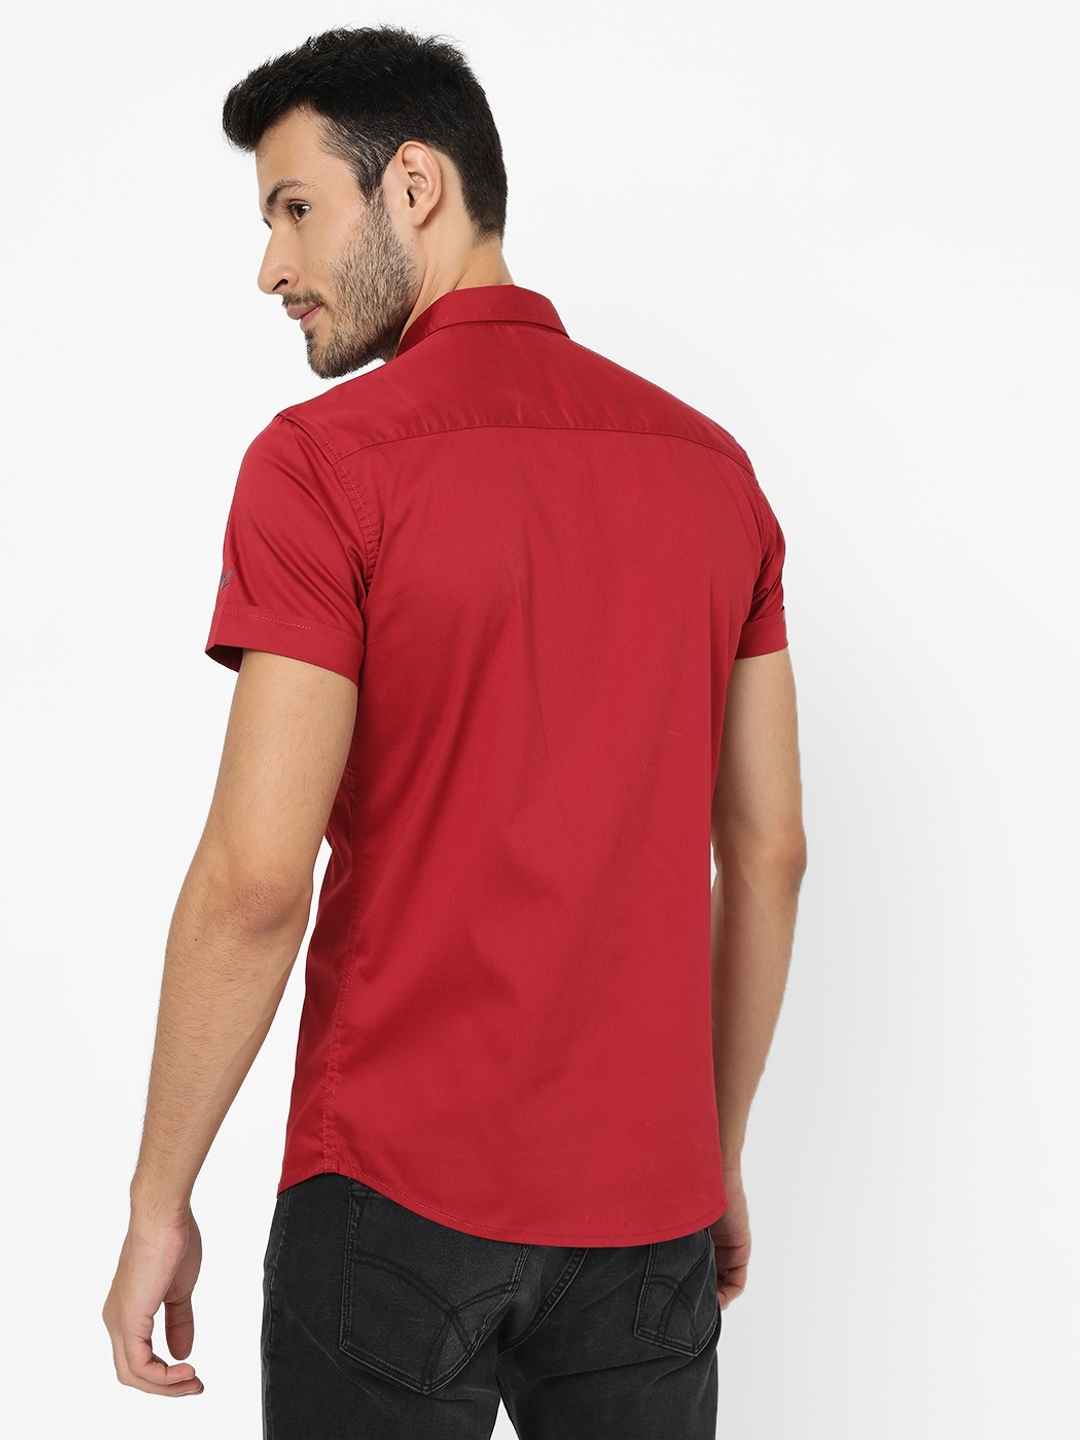 Slim Fit Shirt with Short Sleeves